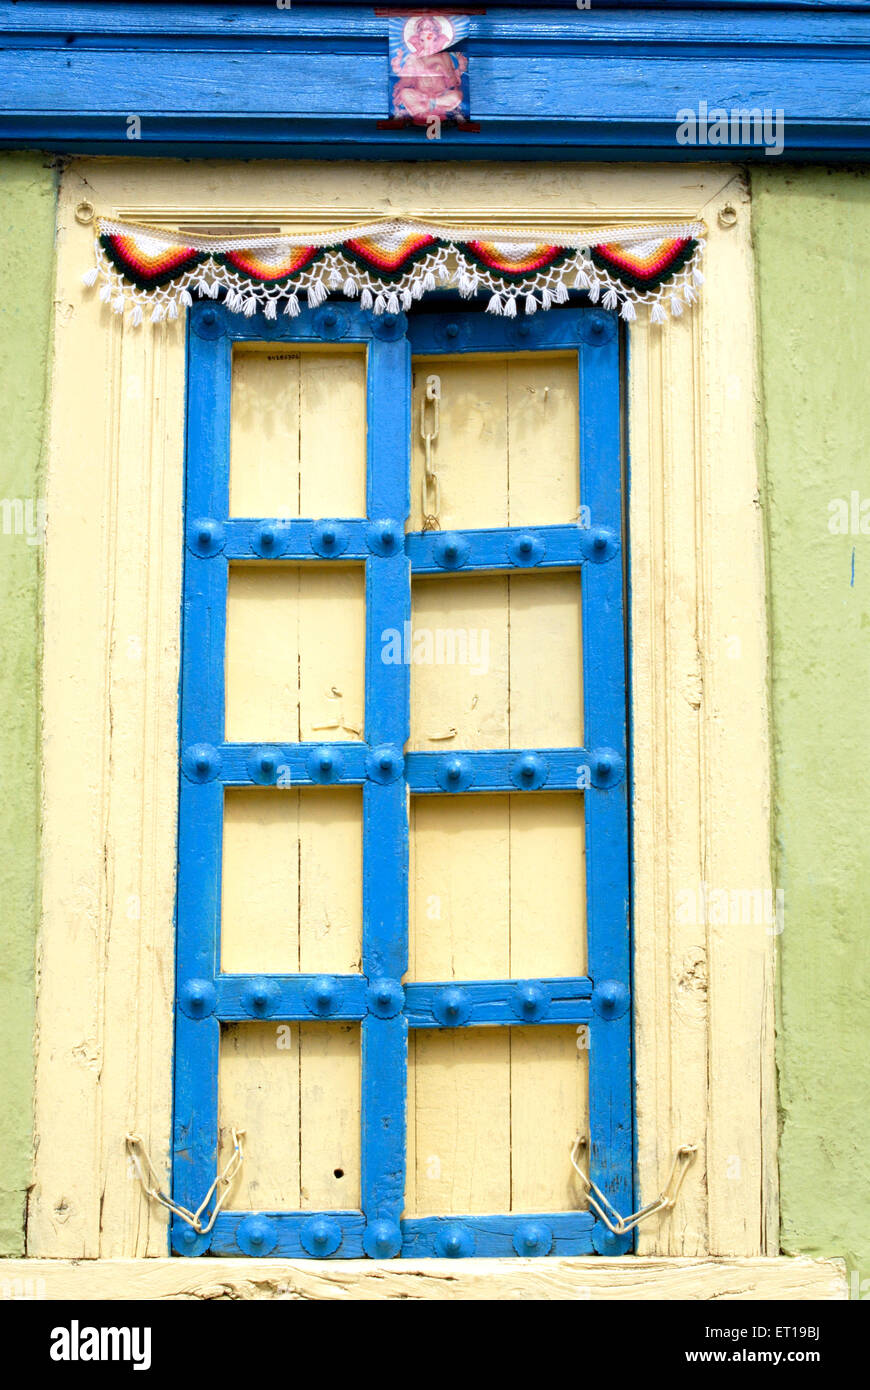 Old door painted with blue and yellow color Stock Photo